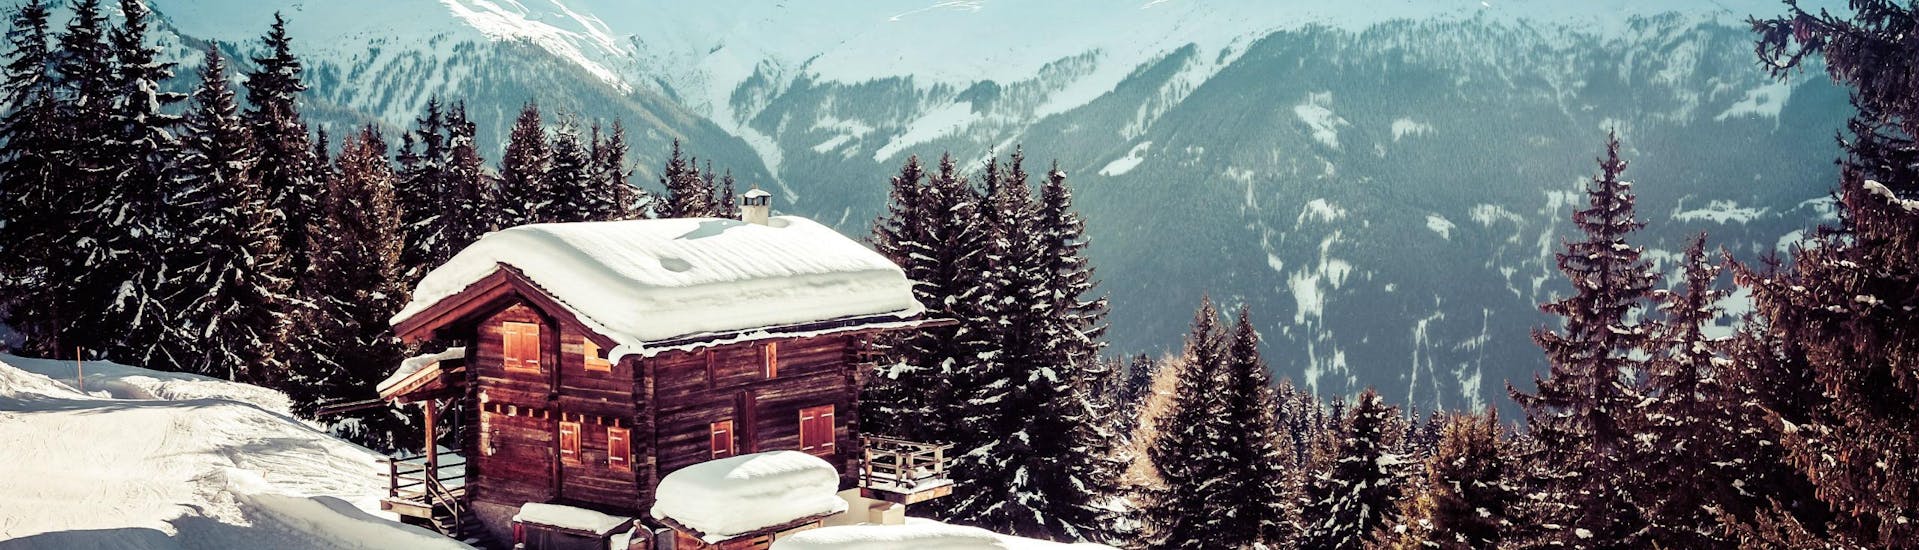 An image of a lone snowboarder boarding past a small mountain hut in the swiss ski resort of Verbier, where where visitors can learn to ski during their ski lessons provided by local ski schools.